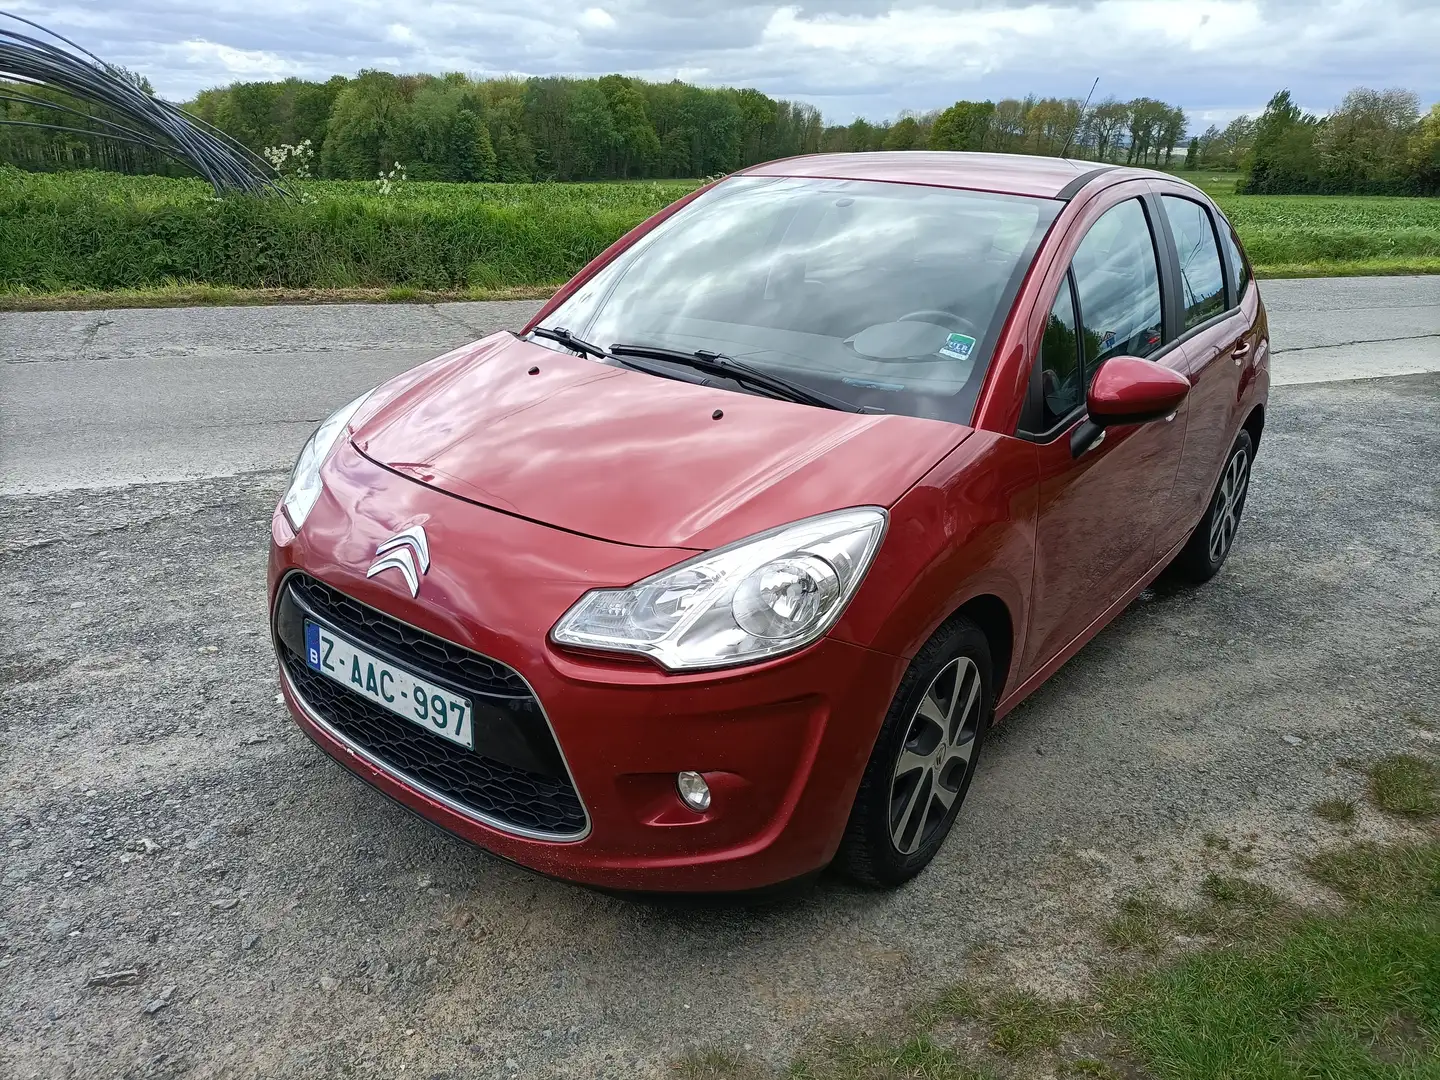 Citroen C3 1.4 HDi Collection 167957 km Rot - 1